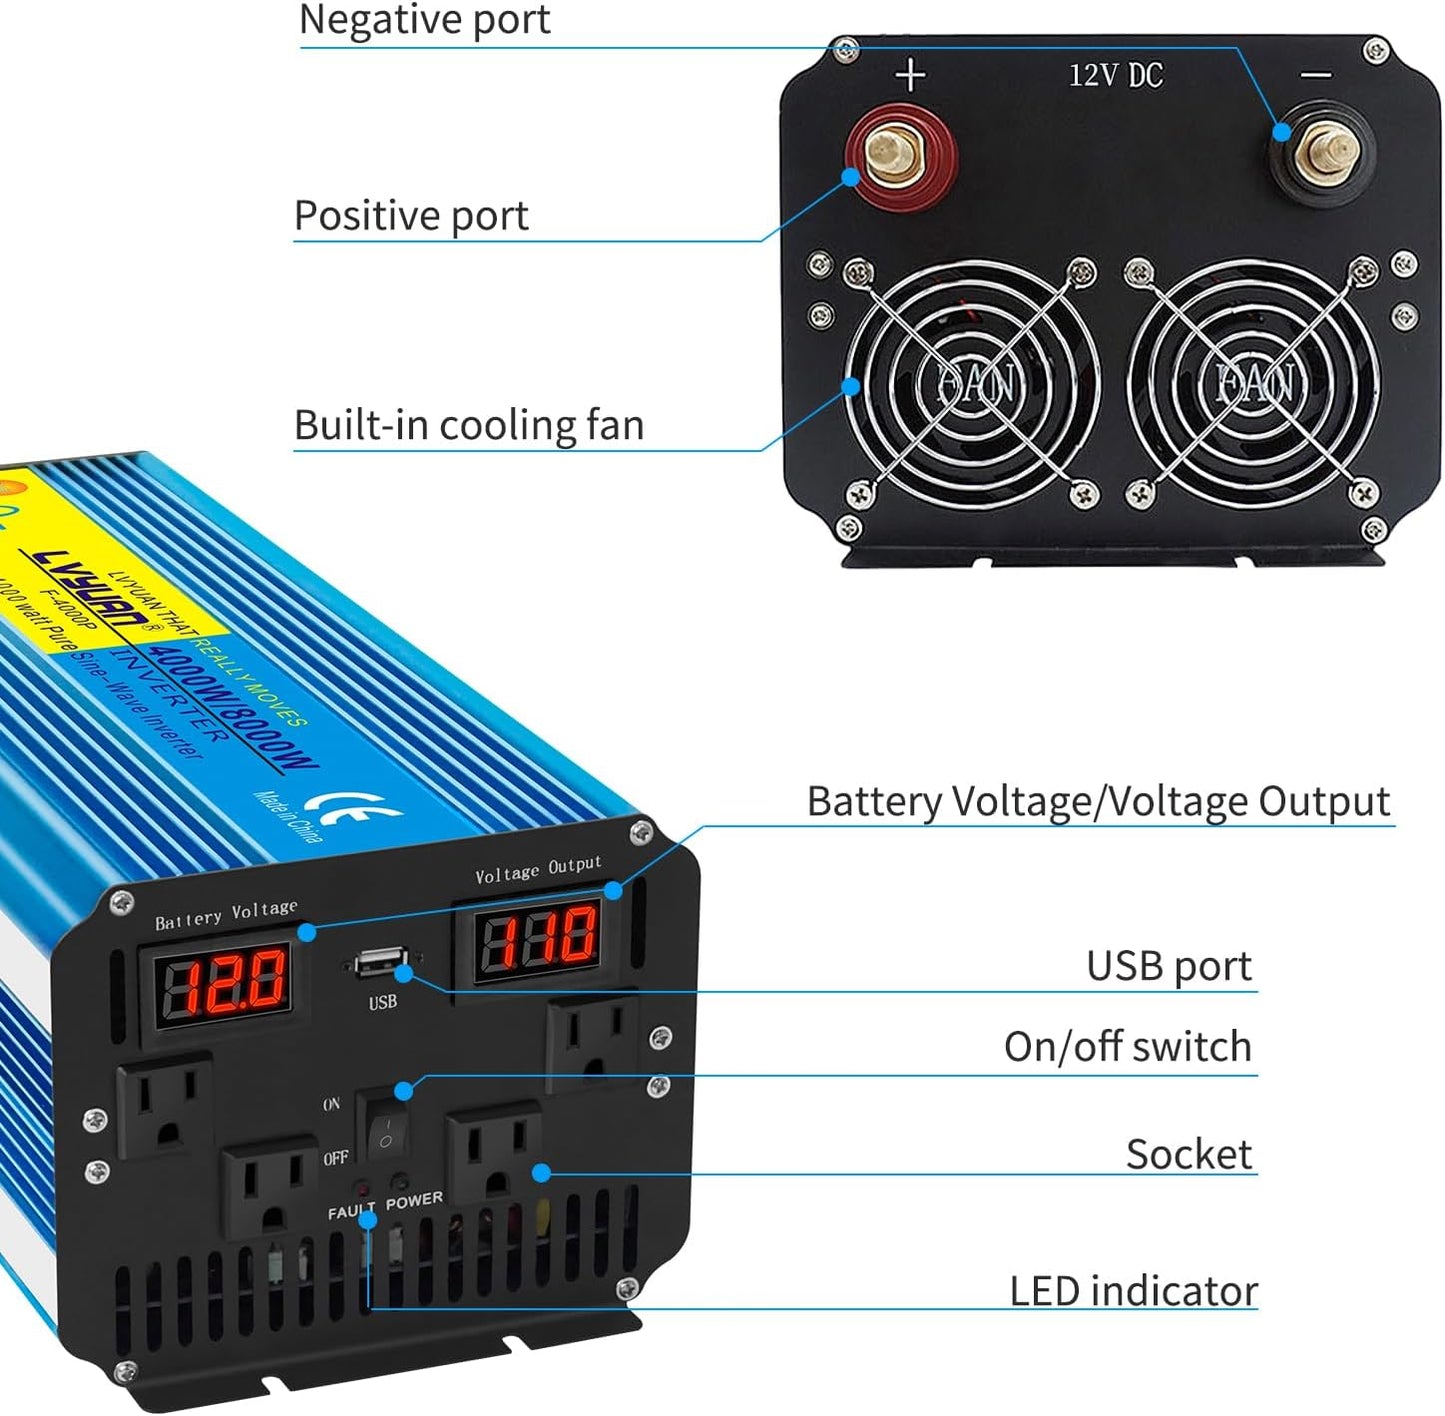 Professional title: "4000W Pure Sine Wave Power Inverter - 12V DC to AC 110V-120V Converter for Family Vehicle, RV, Truck, Solar System - Ideal for Road Trips, Camping, Emergencies - Includes 4 AC Charger Outlets, LED Display, and Remote Controller"